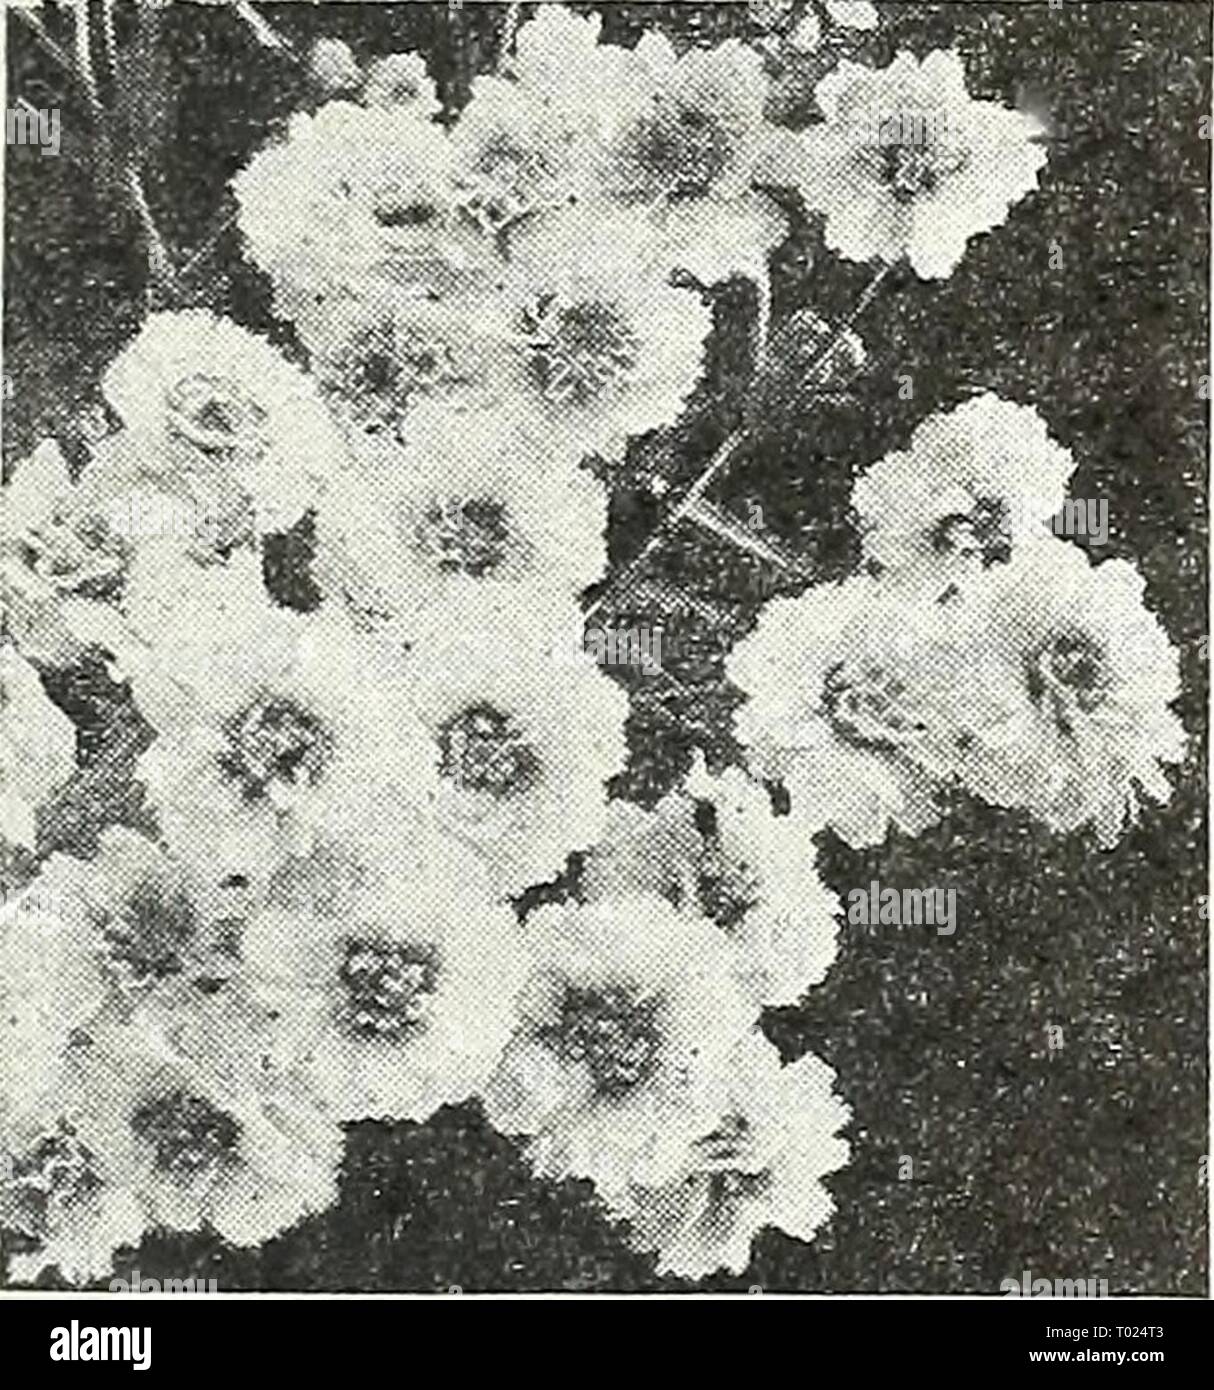 Dreer's garden book for 1947 . dreersgardenbook1947henr Year: 1947  Acroclinium Acroclinium ® 1030 Giant Double Mixed. A pretty Everlasting growing about IS inches tall and bearing lovely white as well as rosy pink flowers throughout the summer and early fall. Easily dried for winter bouquets aside from its value in the border. Pkt. I5c; large pkt. 60c.    Achillea ptarmica. The Pearl Achillea—^''/«'' t^^] ® 1012 Filipendula, Cloth of Cold. Strong,* vigorous plants with vivid yellow flowers during the summer. 3 ft. Pkt. 15c; large pkt. 60c. 1015 Ptarmica, The Pearl. One of the best hardy white Stock Photo